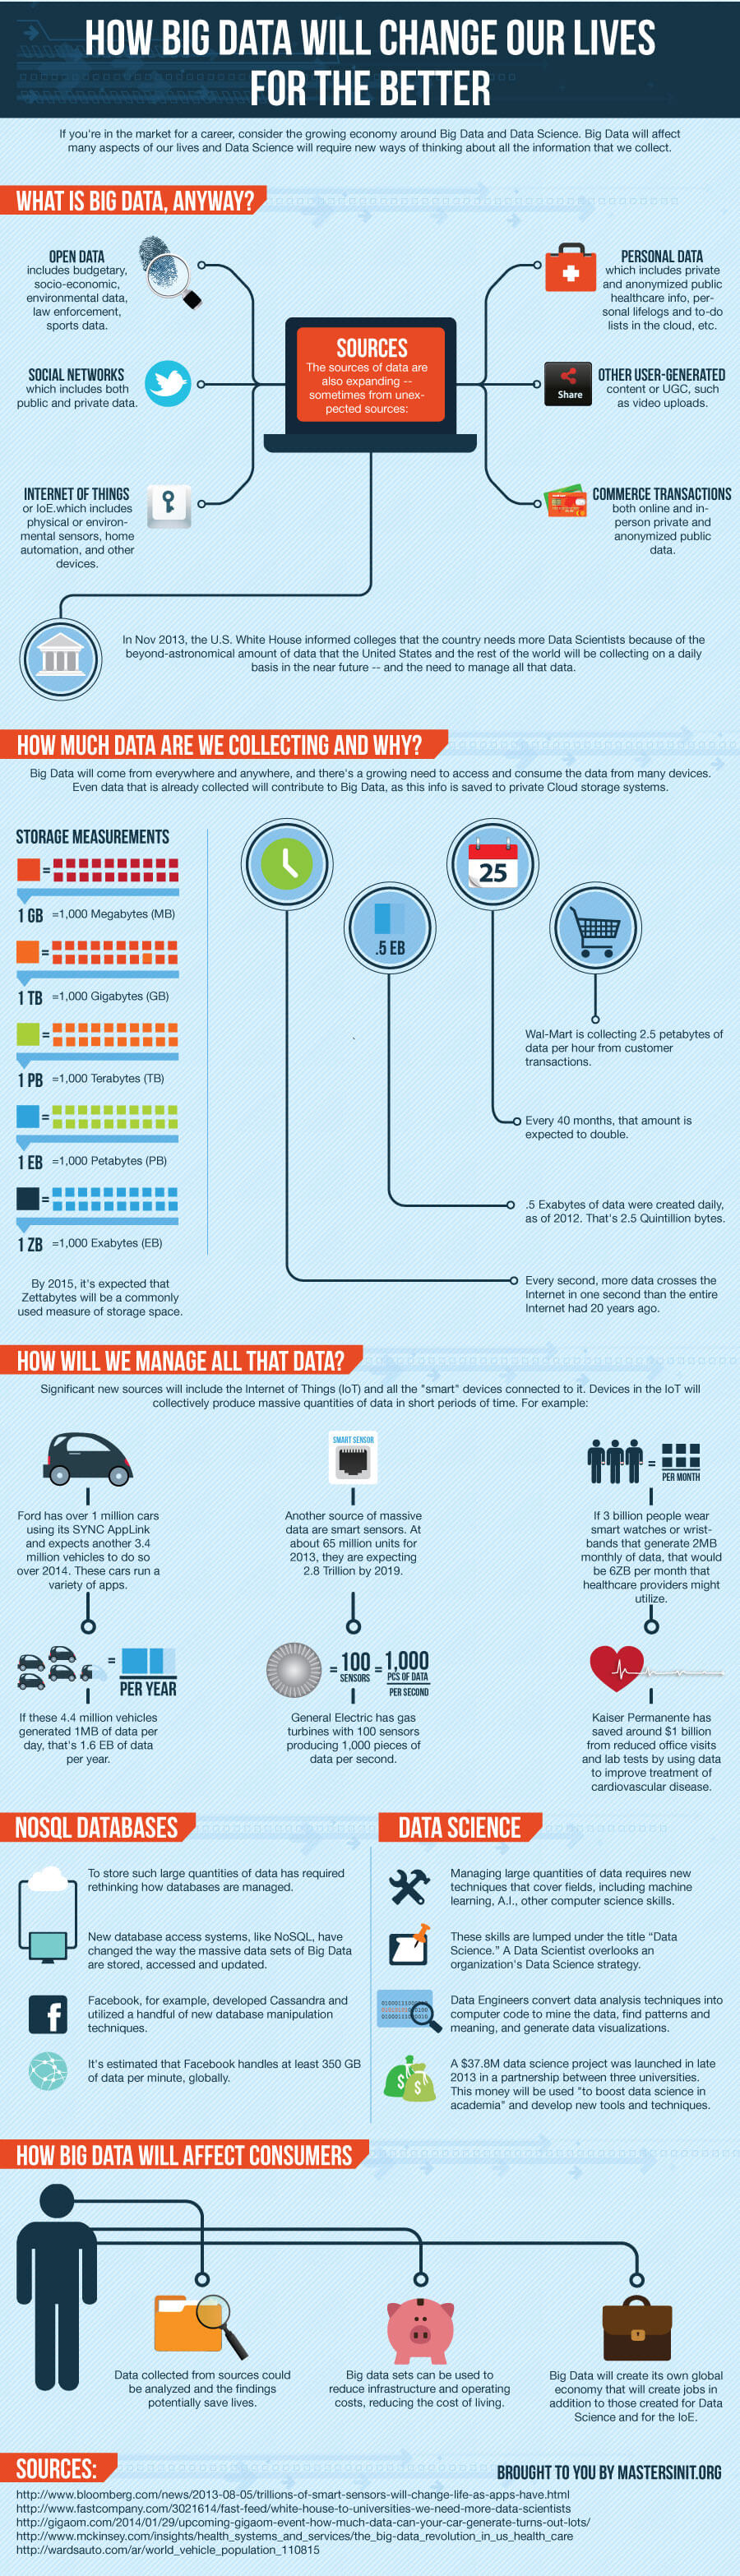 Infographic - How Big Data Will Change Our Lives For The Better